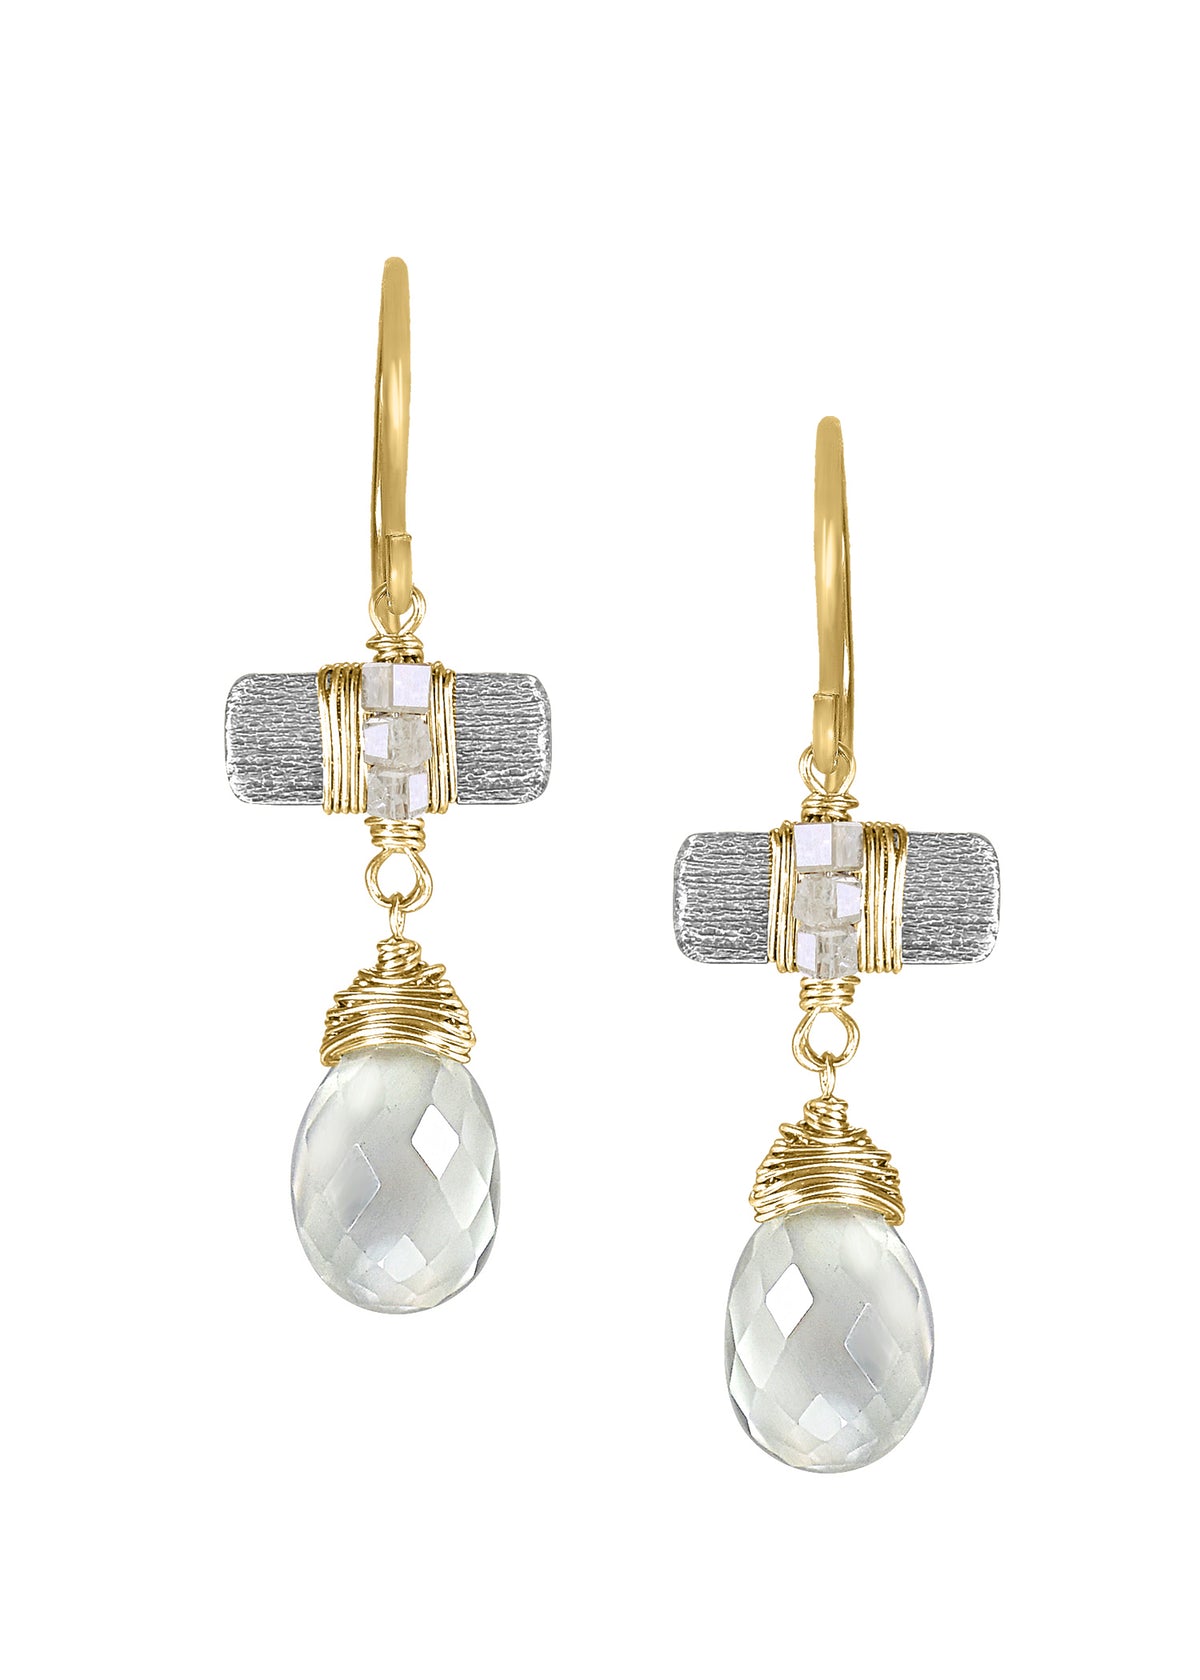 Diamonds Gray moonstone 14k gold Sterling silver Mixed metal Earrings measure 1-1/4&quot; in length (including the ear wires) and 3/8&quot; in width at the widest point Handmade in our Los Angeles studio